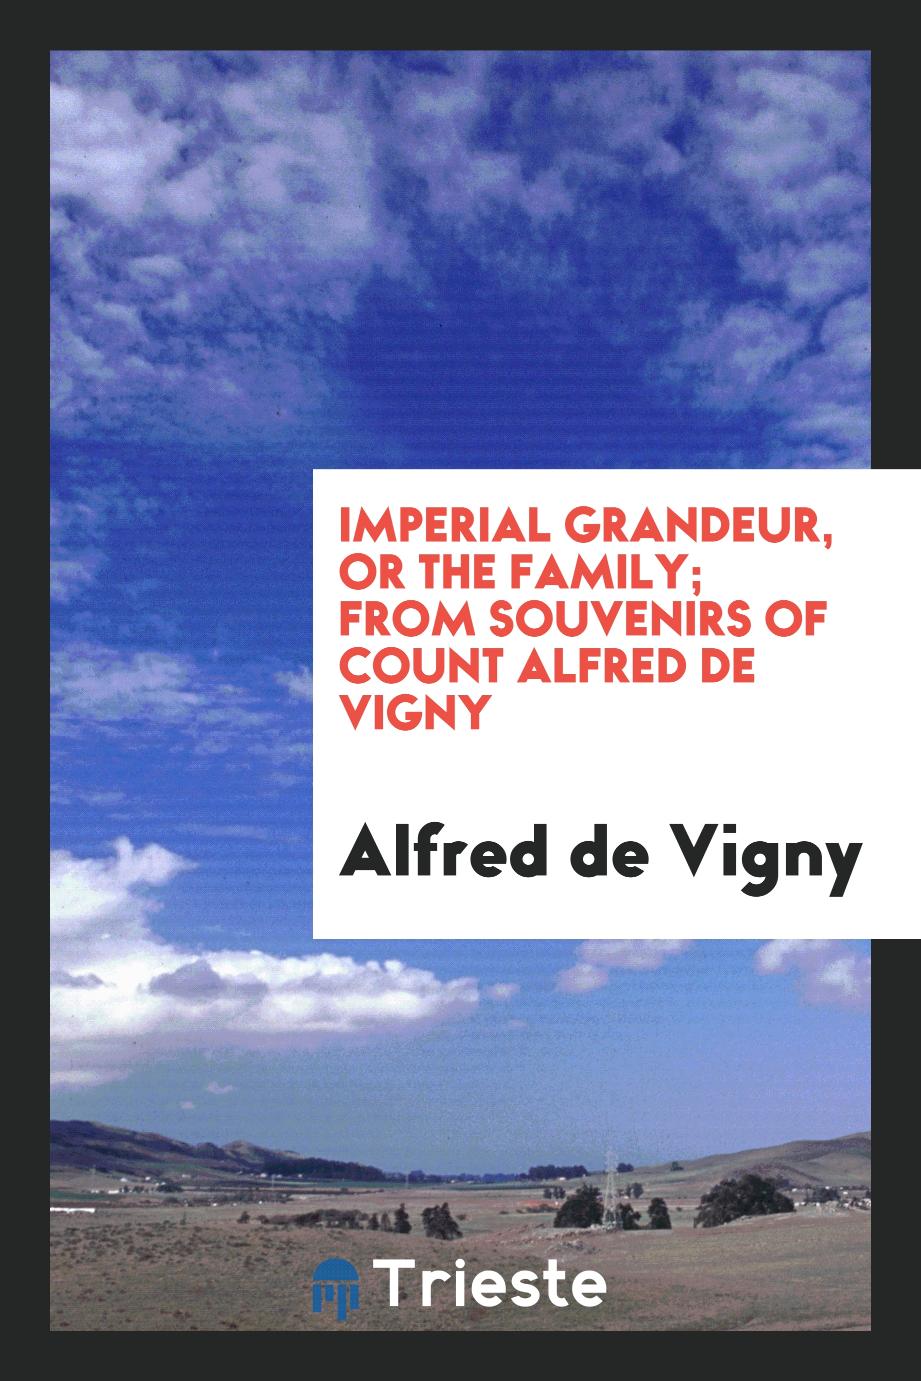 Imperial grandeur, or The family; from Souvenirs of Count Alfred de Vigny